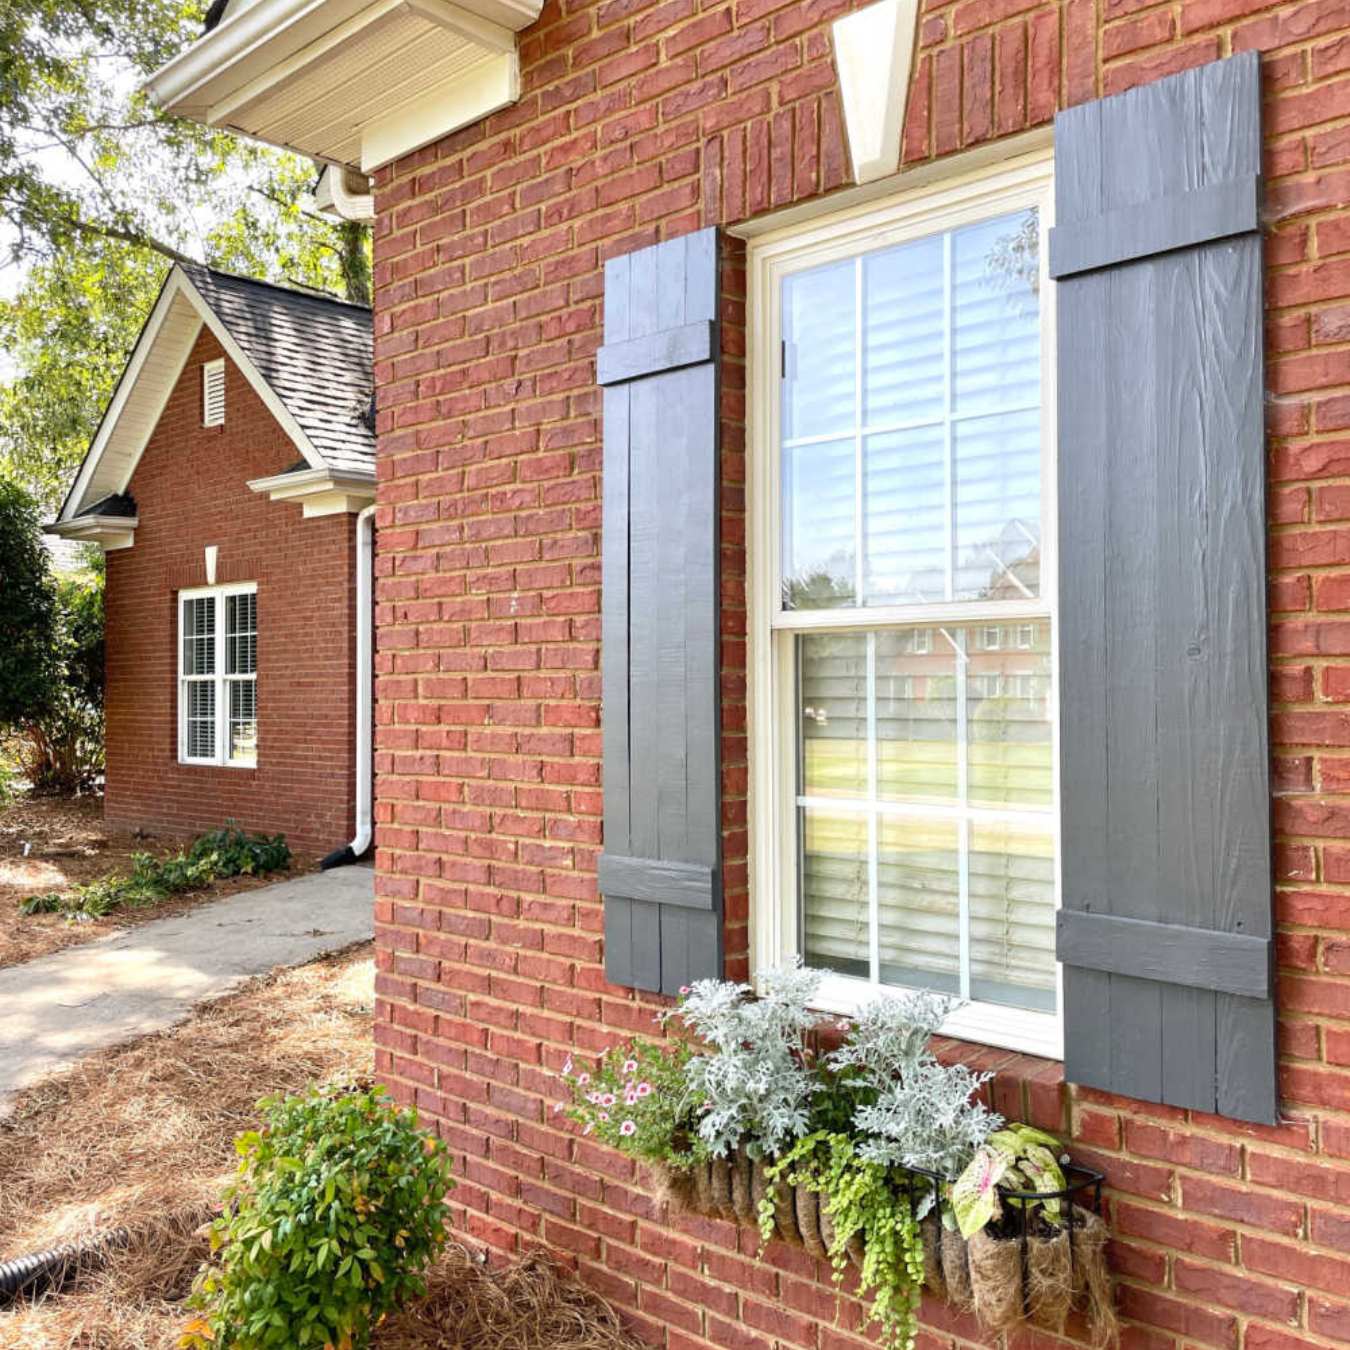 How To Replace Shutters On A Brick House